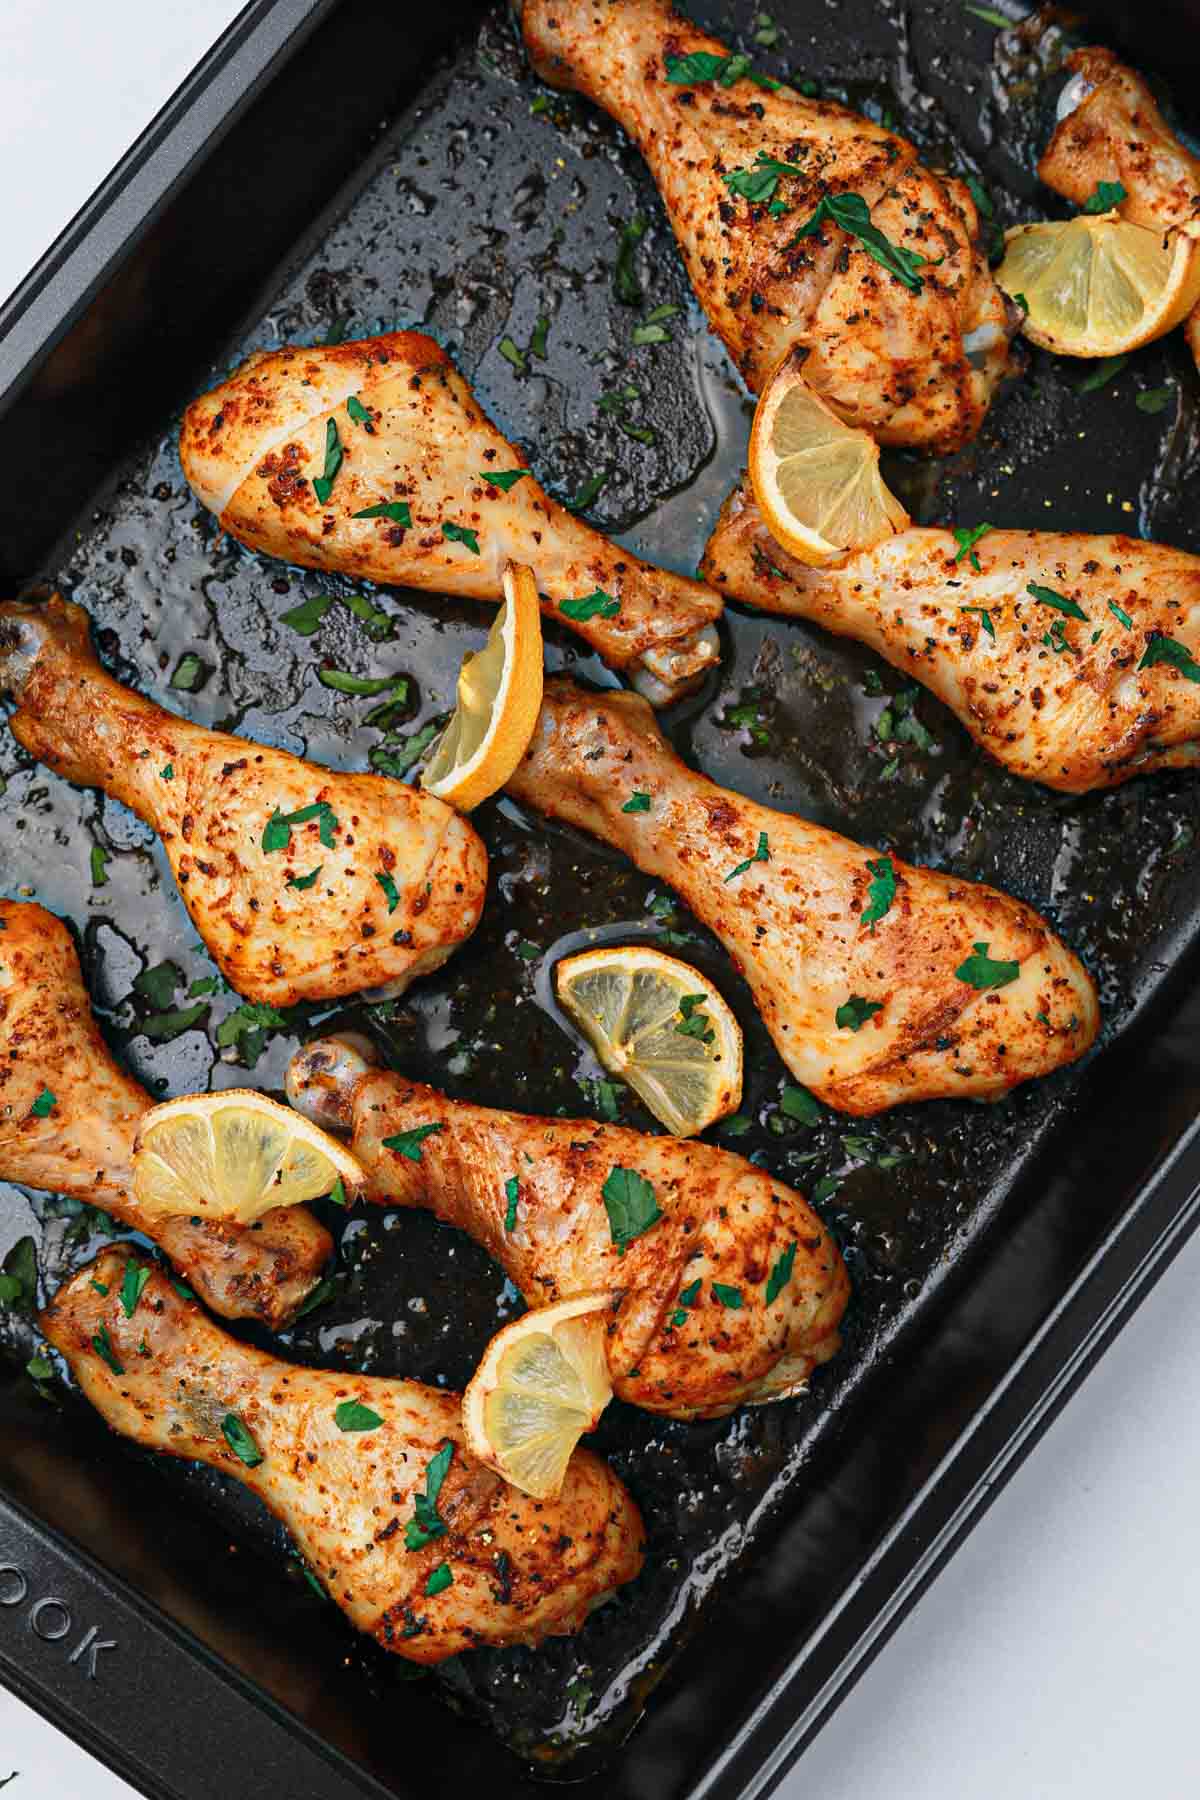 cooked lemon pepper chicken drumsticks on a baking tray.